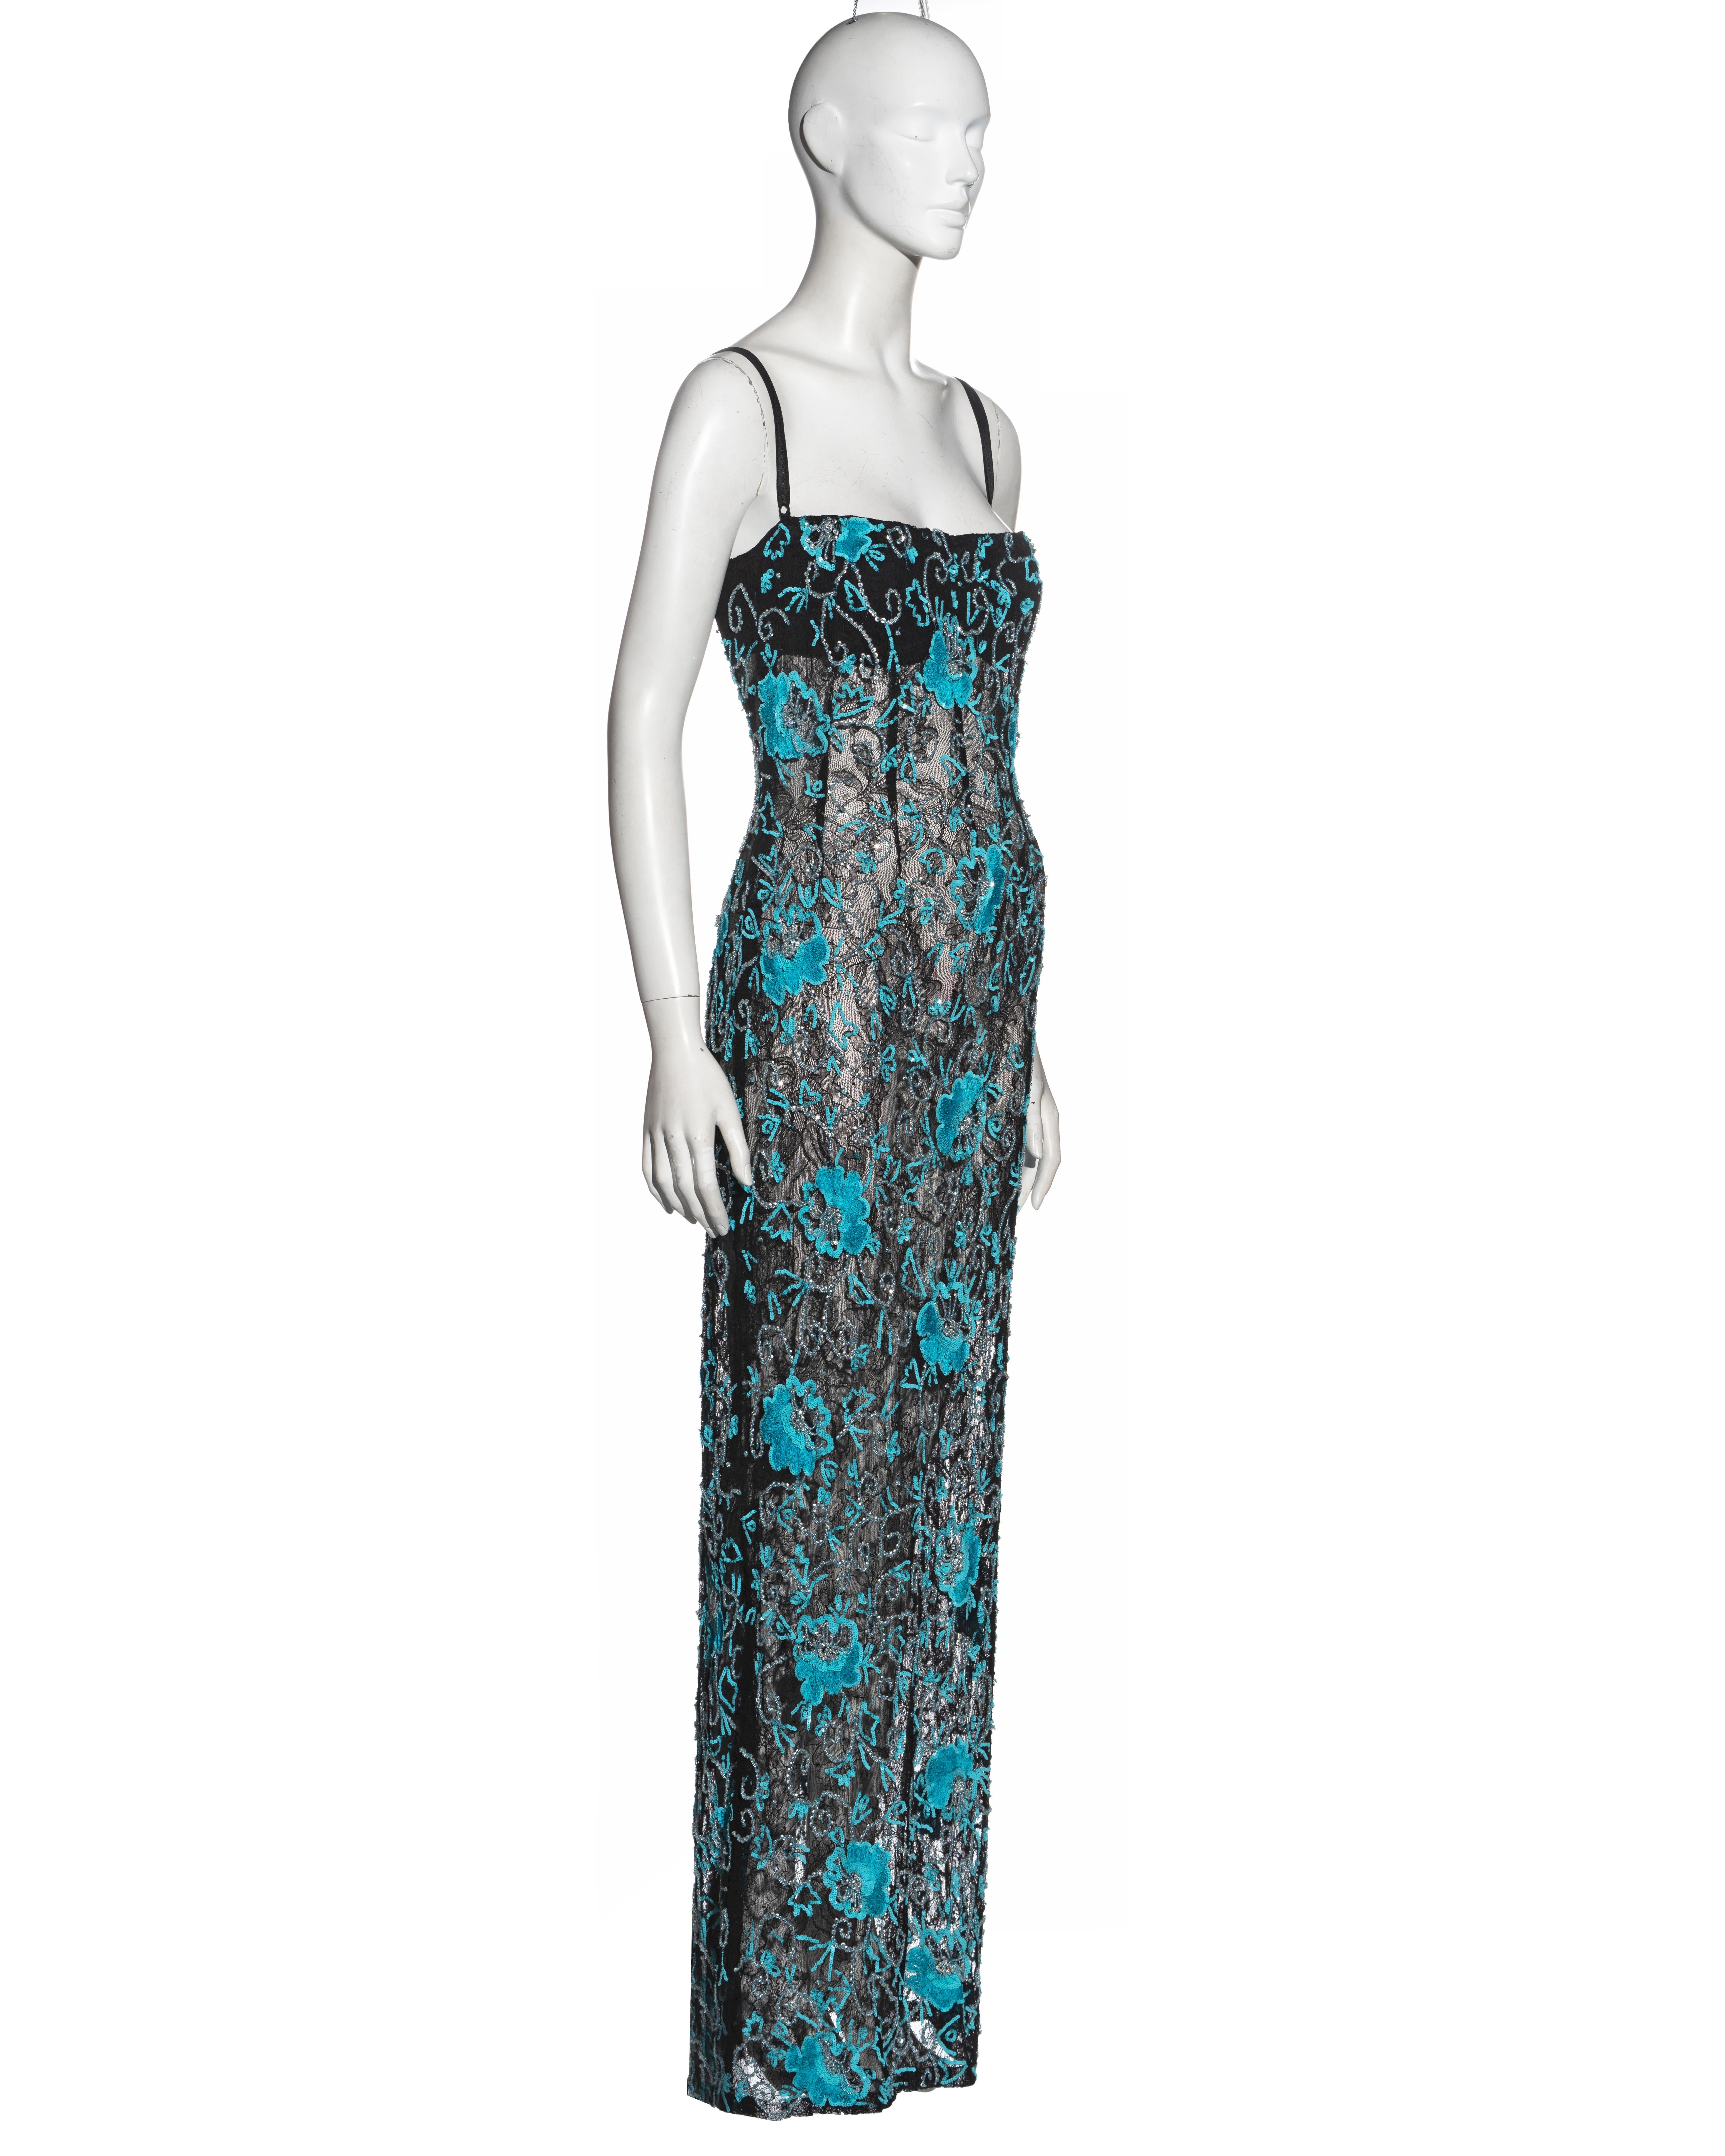 Dolce & Gabbana black lace evening dress with turquoise embroidery, fw 1999 In Excellent Condition In London, GB